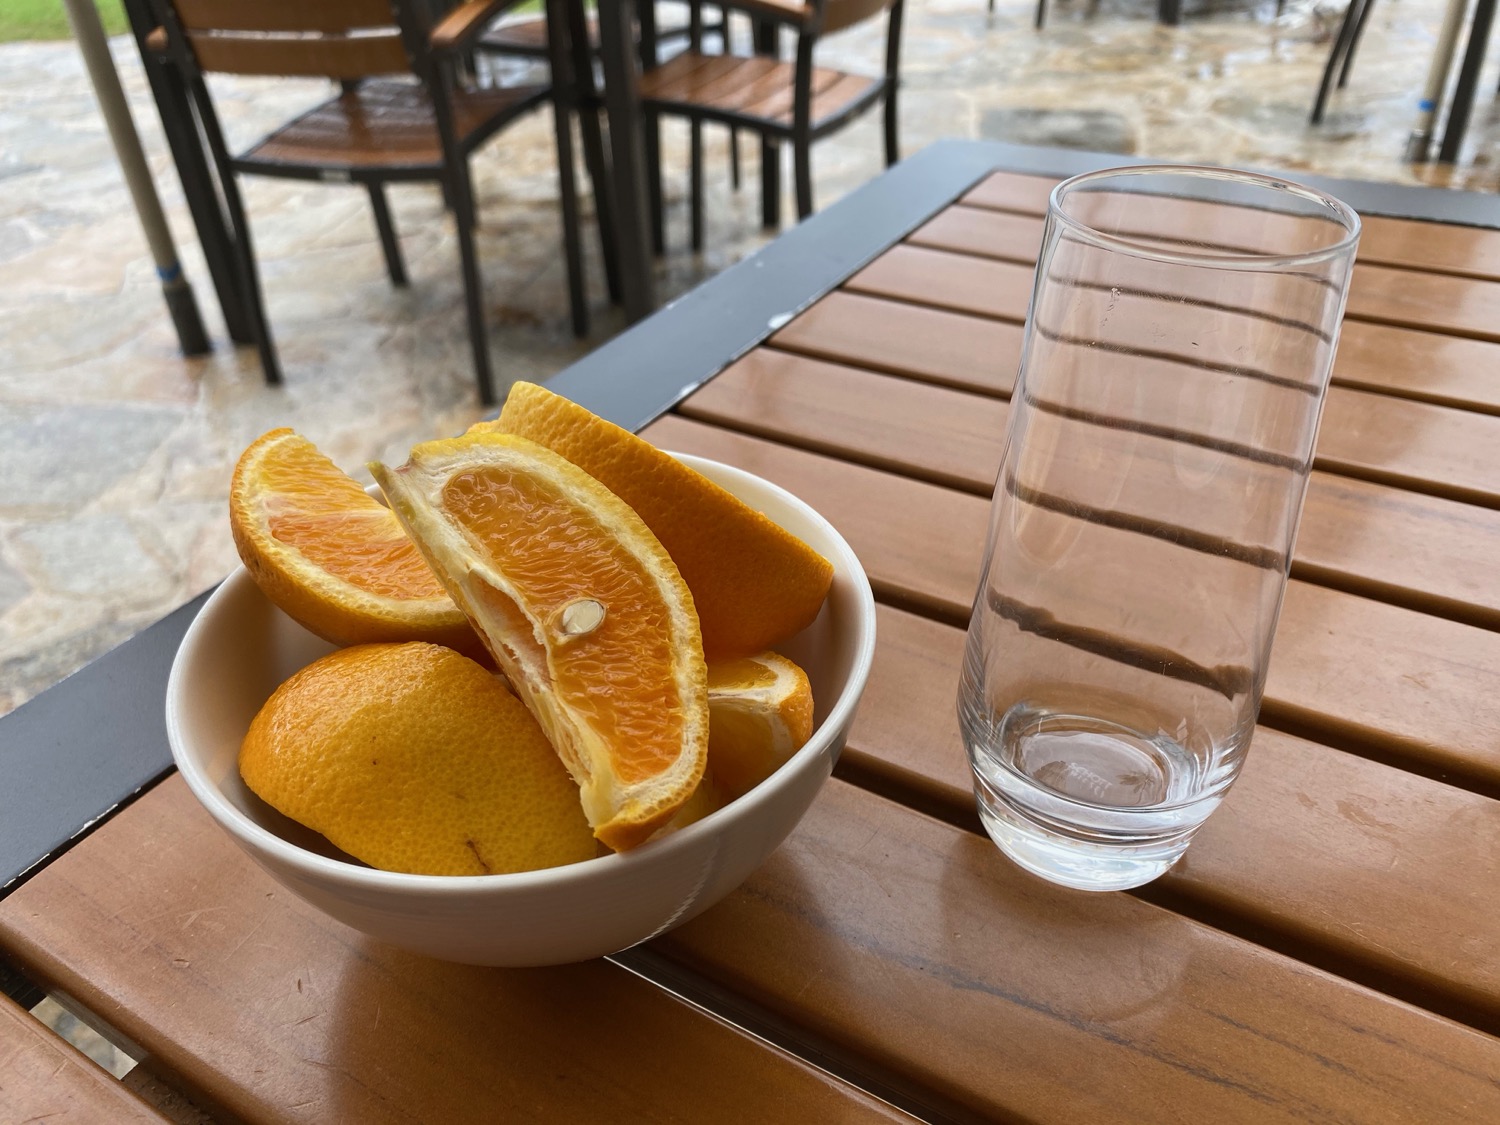 a bowl of oranges and a glass on a table